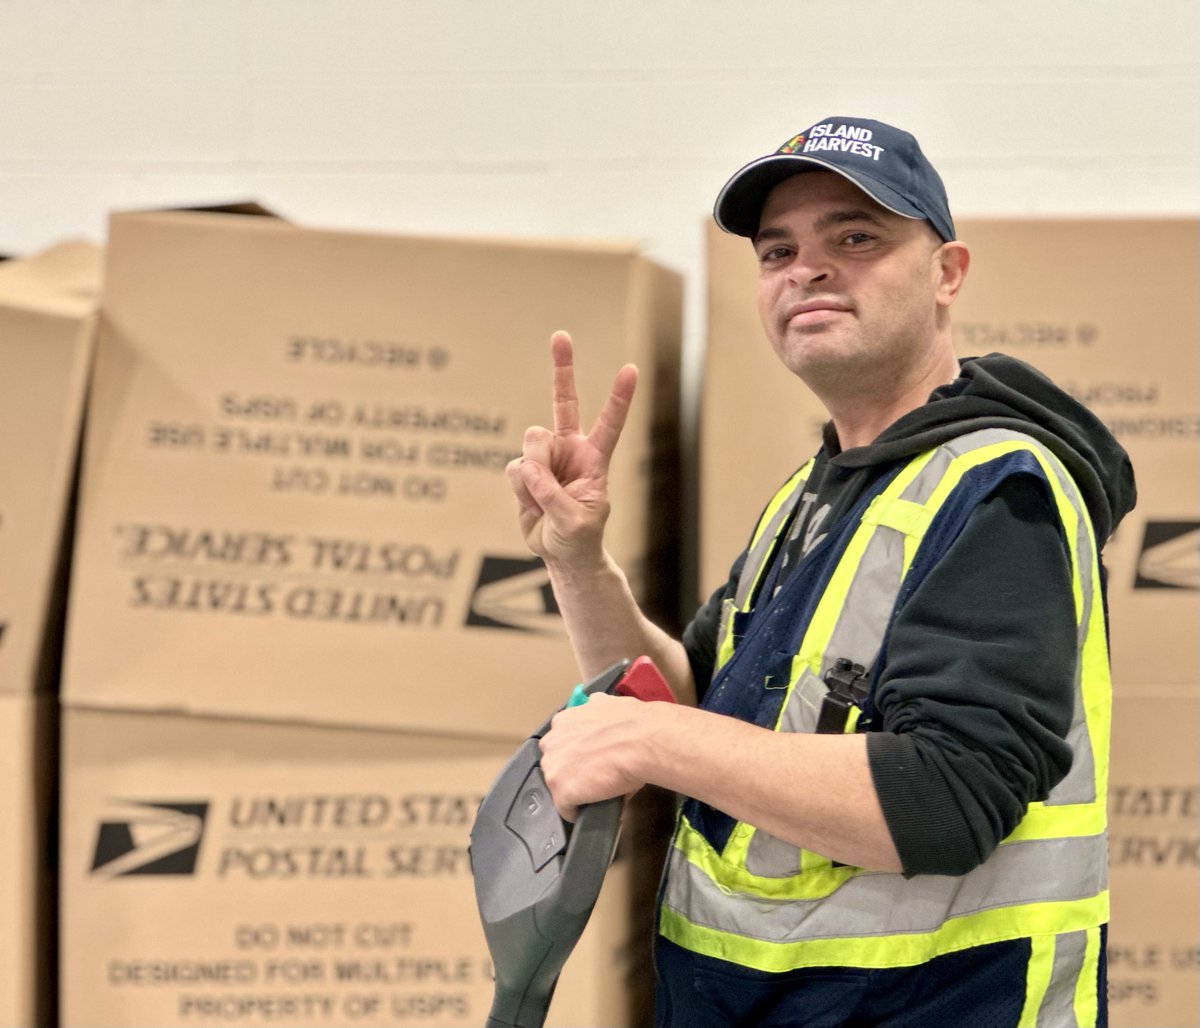 Our warehouse team is ready to get to work offloading, moving & weighing donation boxes! They are the best! #stampouthunger #islandharvest #longisland